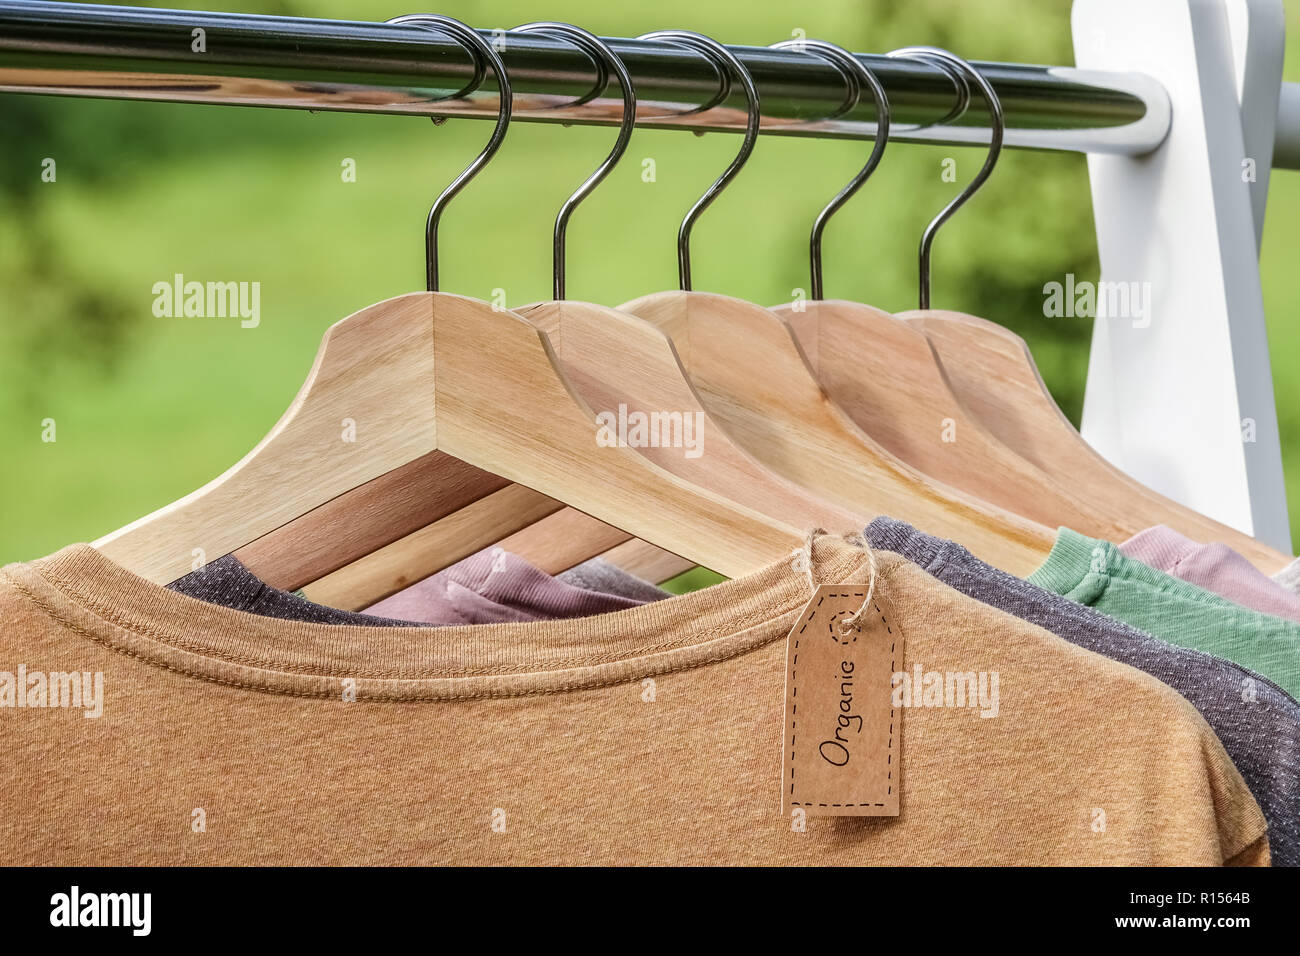 Organic clothes. Natural colored t-shirts hanging on wooden hangers in a row. Eco textile tag. Green forest, nature in background. Stock Photo